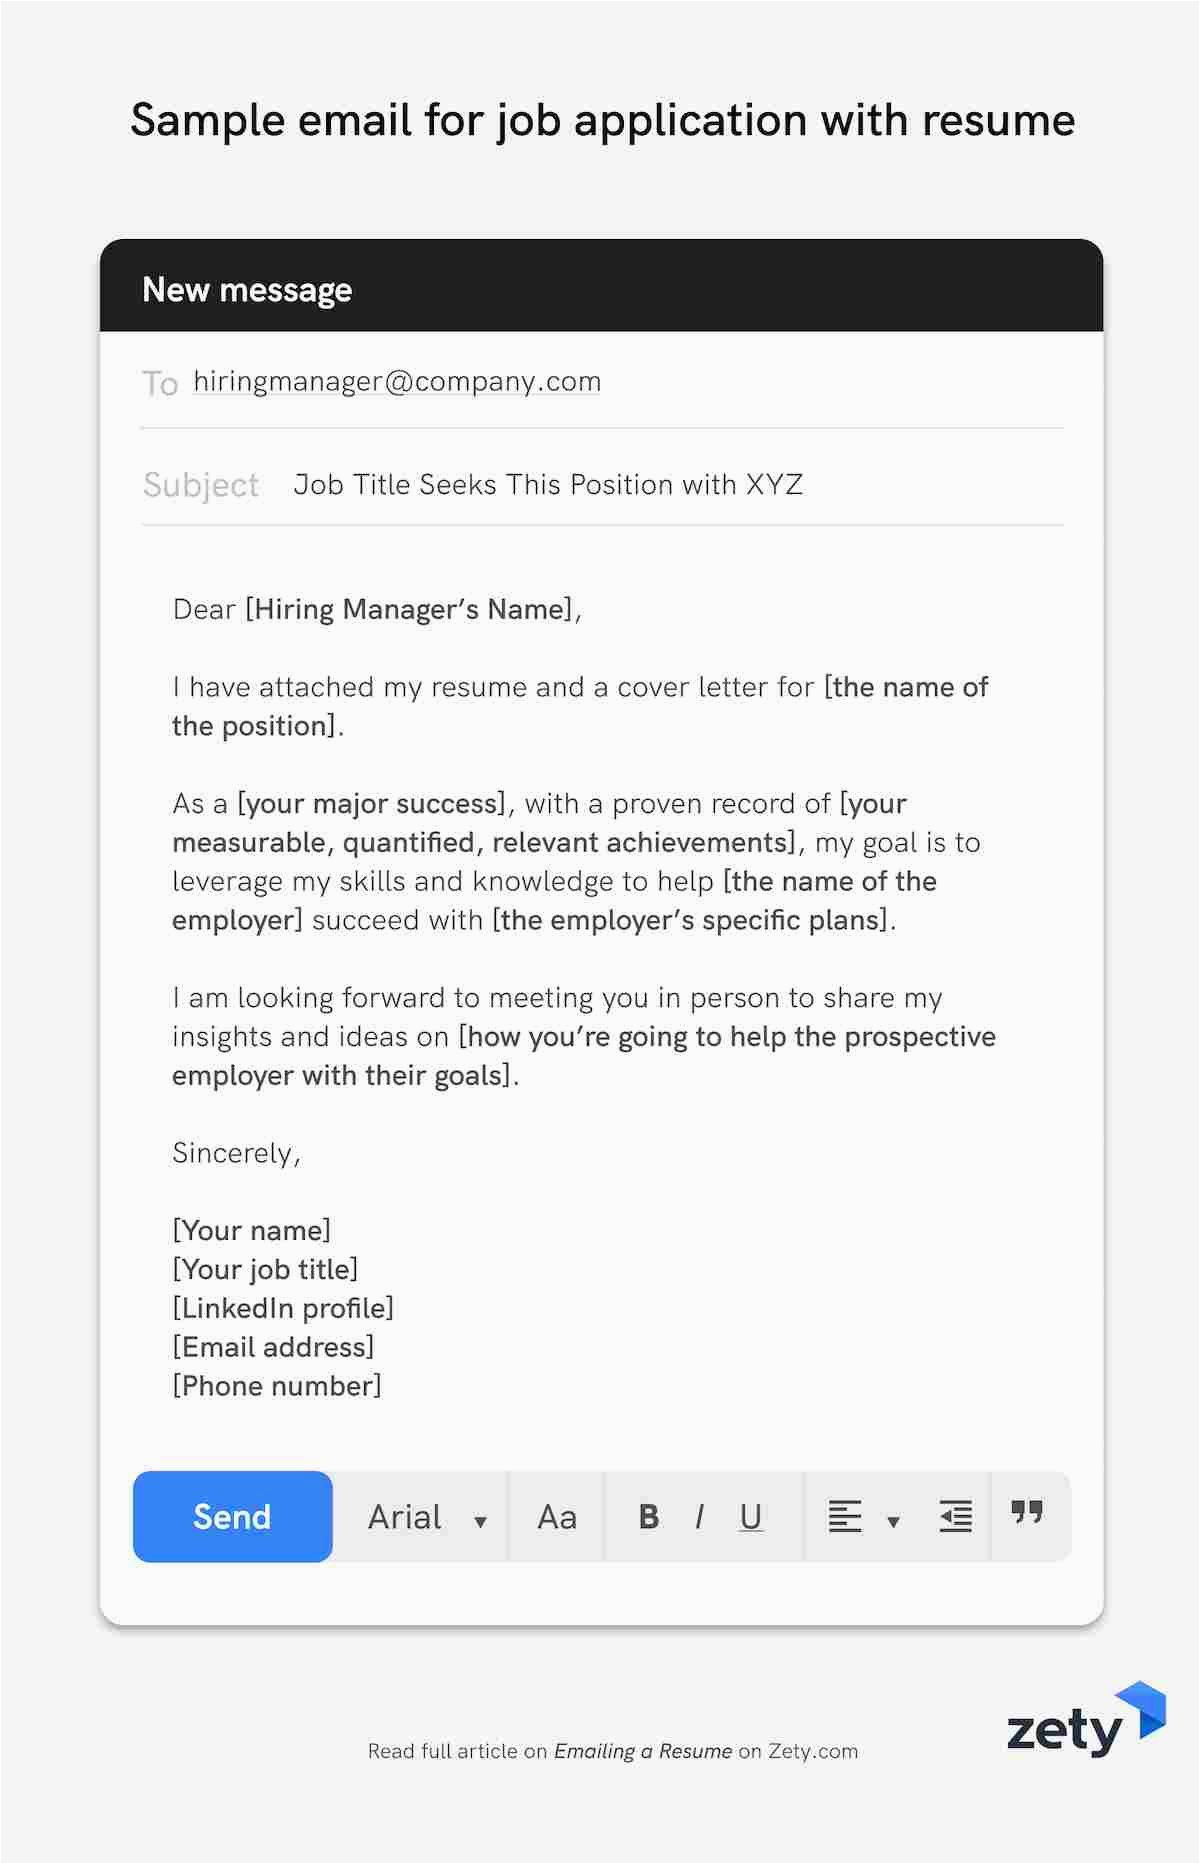 Email for Job Application with Resume Sample Emailing A Resume 12 Job Application Email Samples